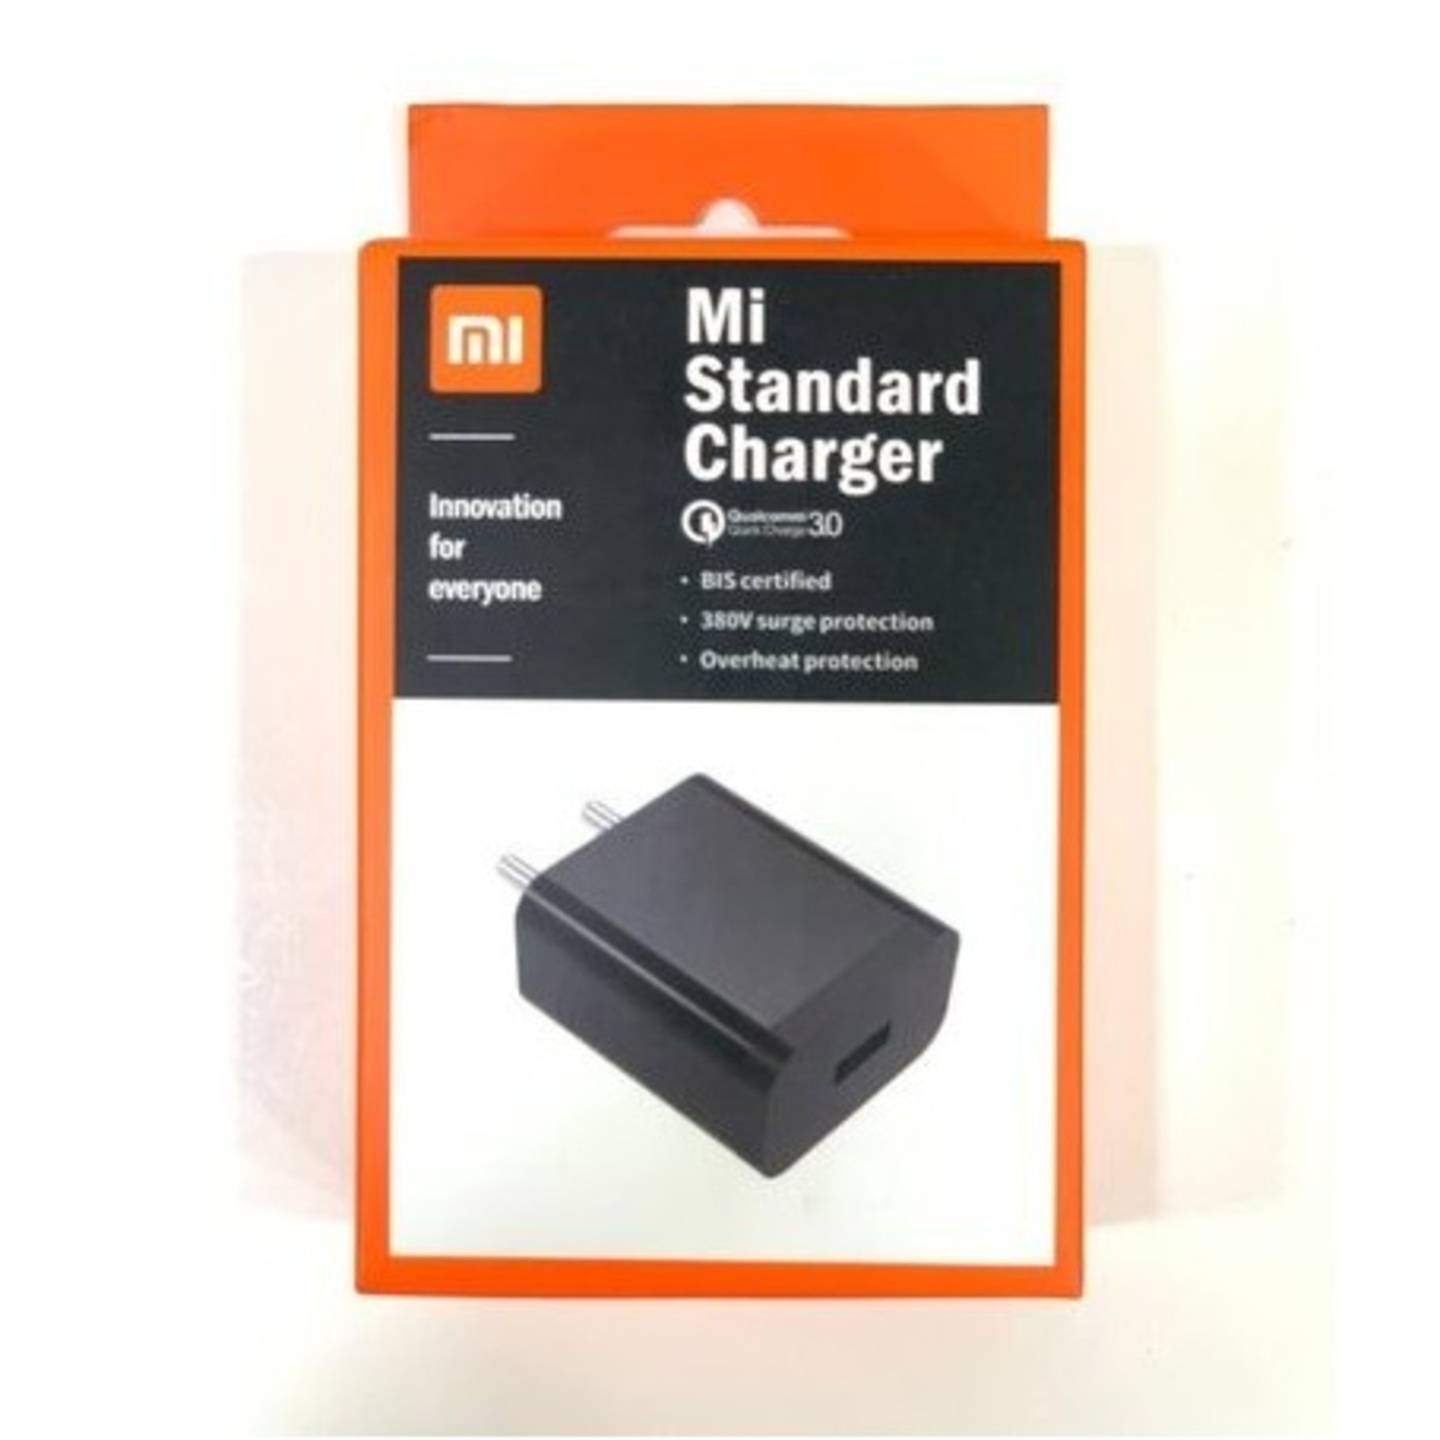 Mi 18W BIS Certified Qualcomm Quick Charger for mobile, headphone, powerbank and TWS